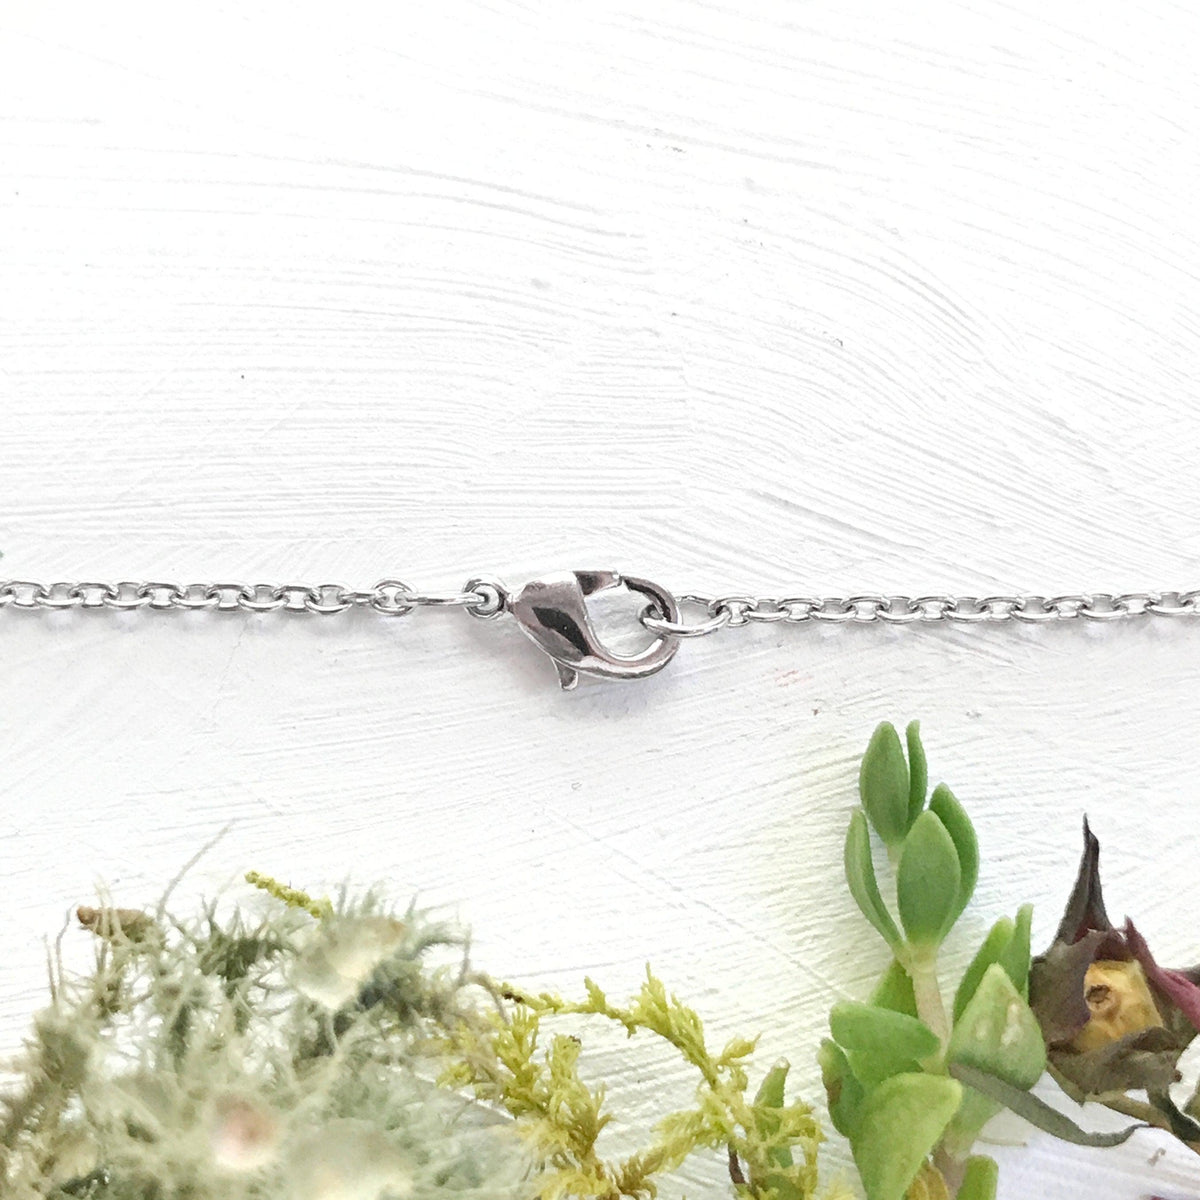 Pansy Silver Necklace